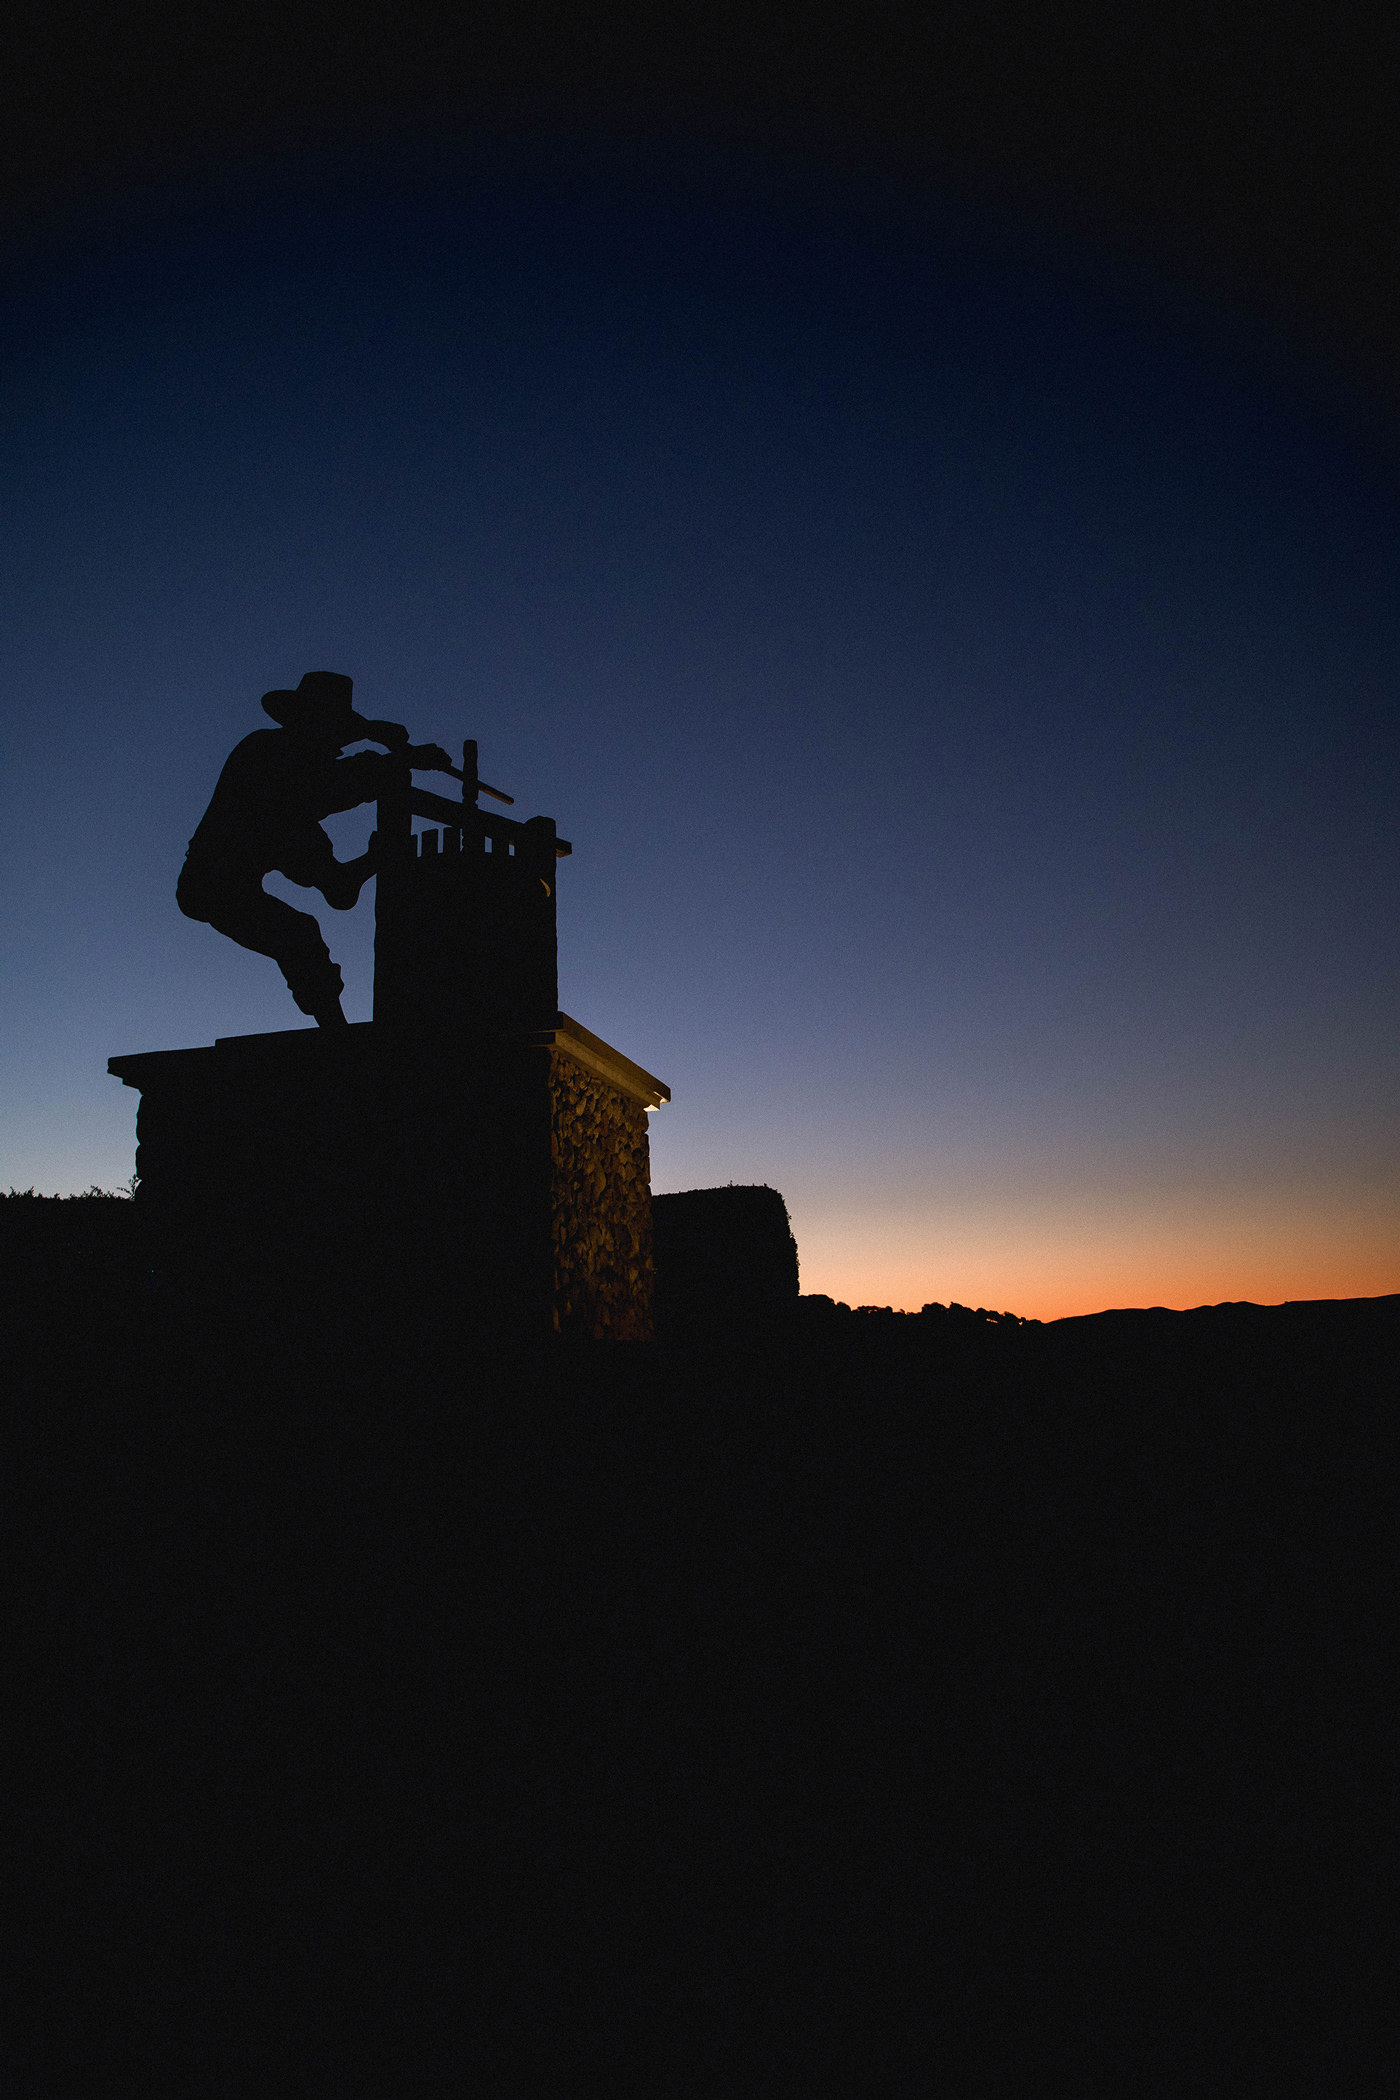 large statue of wine press worker silhouetted against sky and hills at dusk